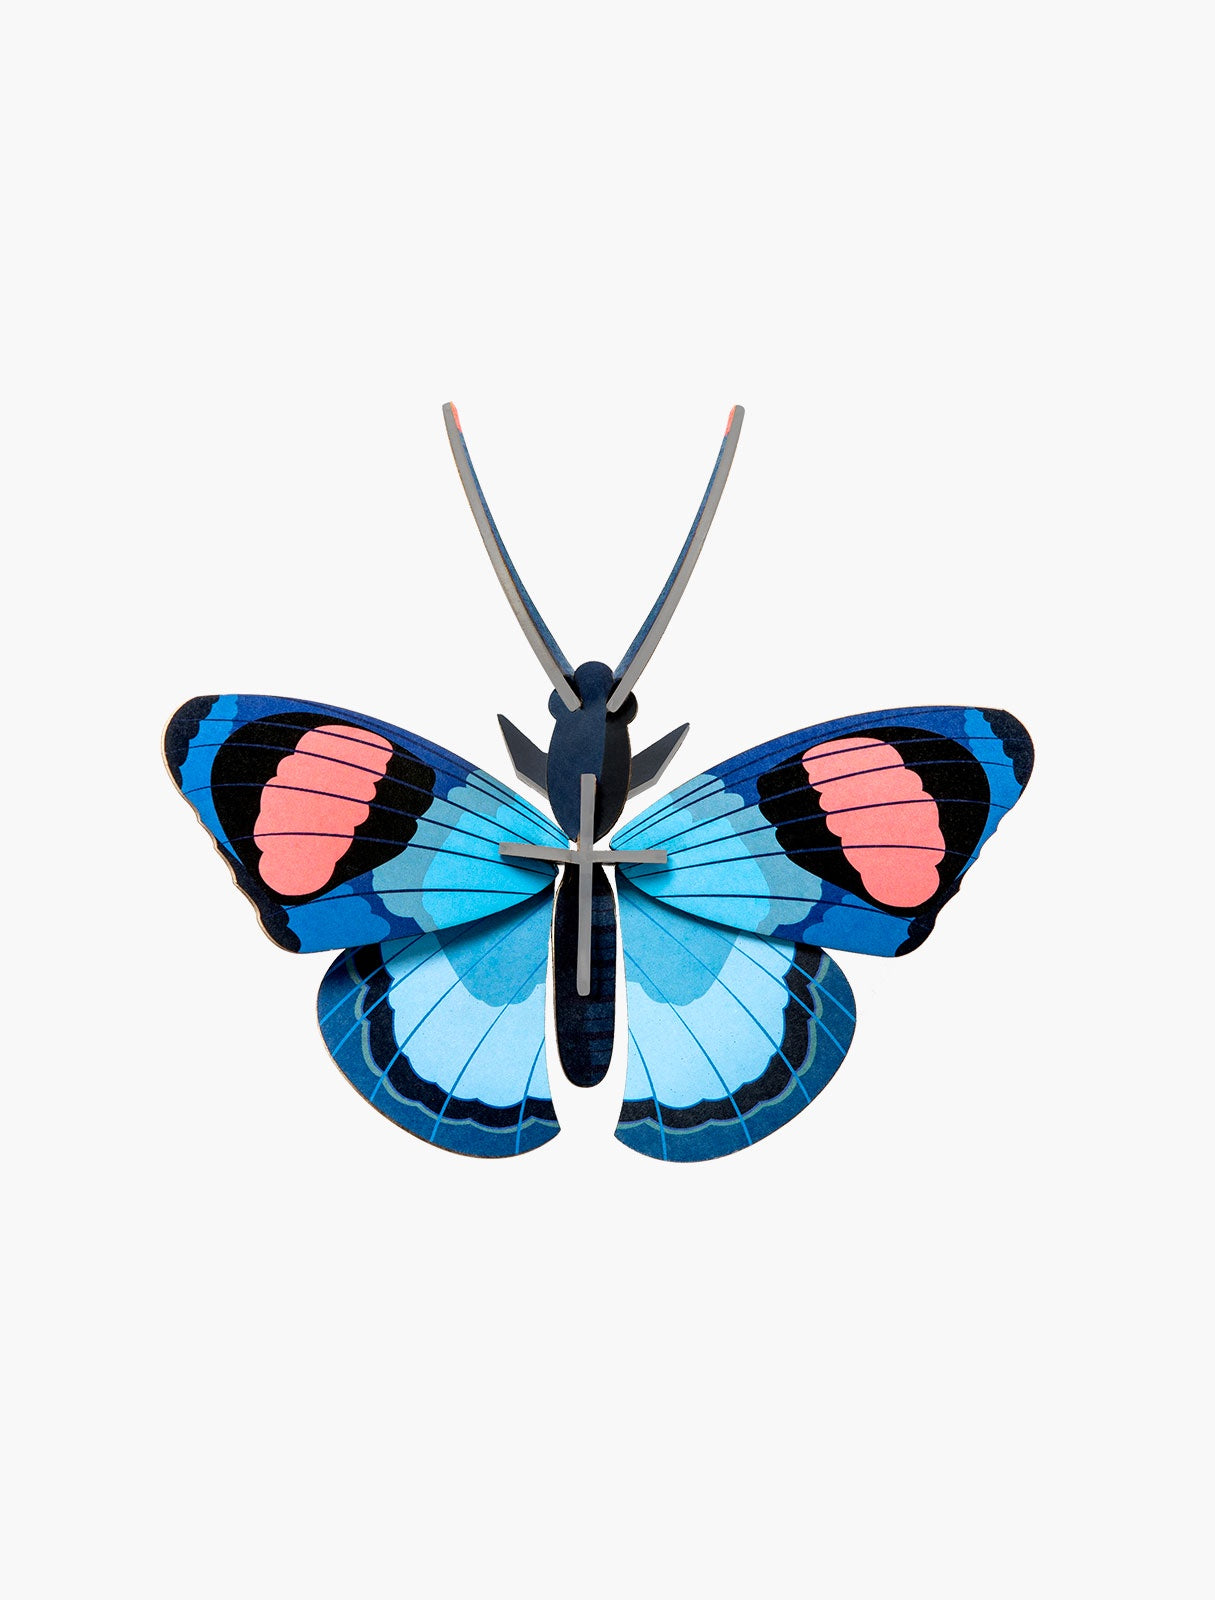 Studio Roof Wall Decor - Peacock Butterfly